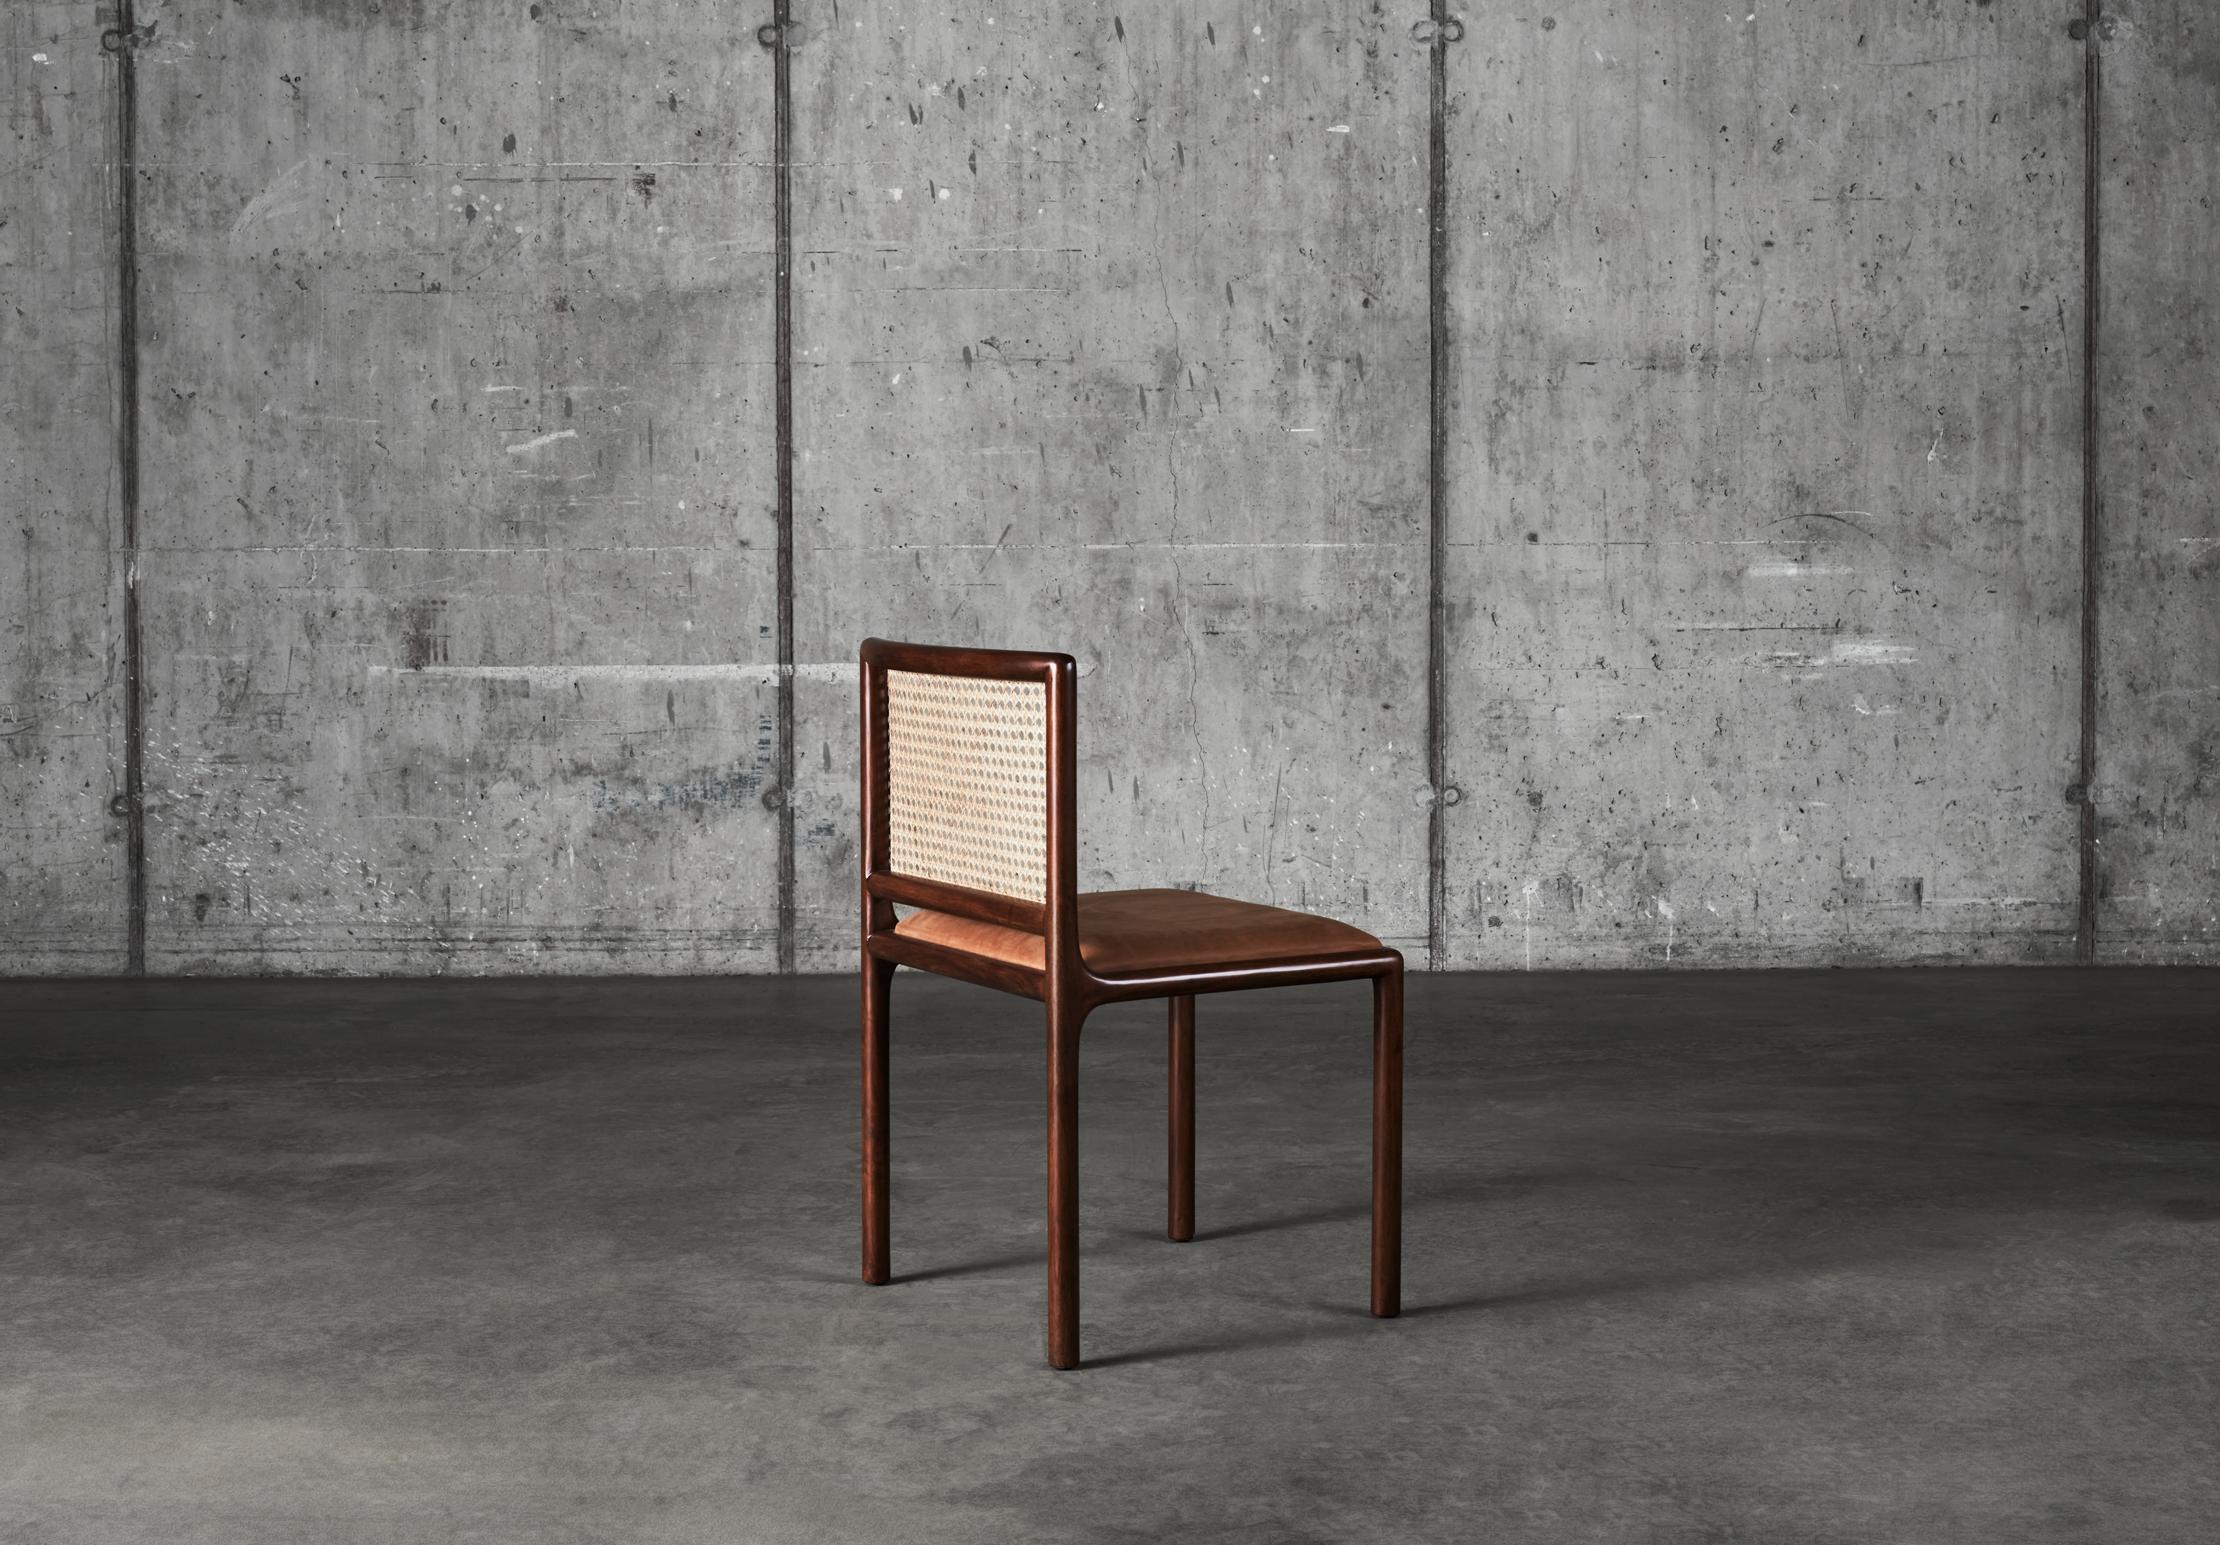 A clean timeless look made in cultivated mahogany and rattan. The seat is upholstered in leather from Danish Sörensen Leather. Dunes cognac is an exclusive Aniline leather with a natural, rustic look and a sublime, almost velvety tactile feel.